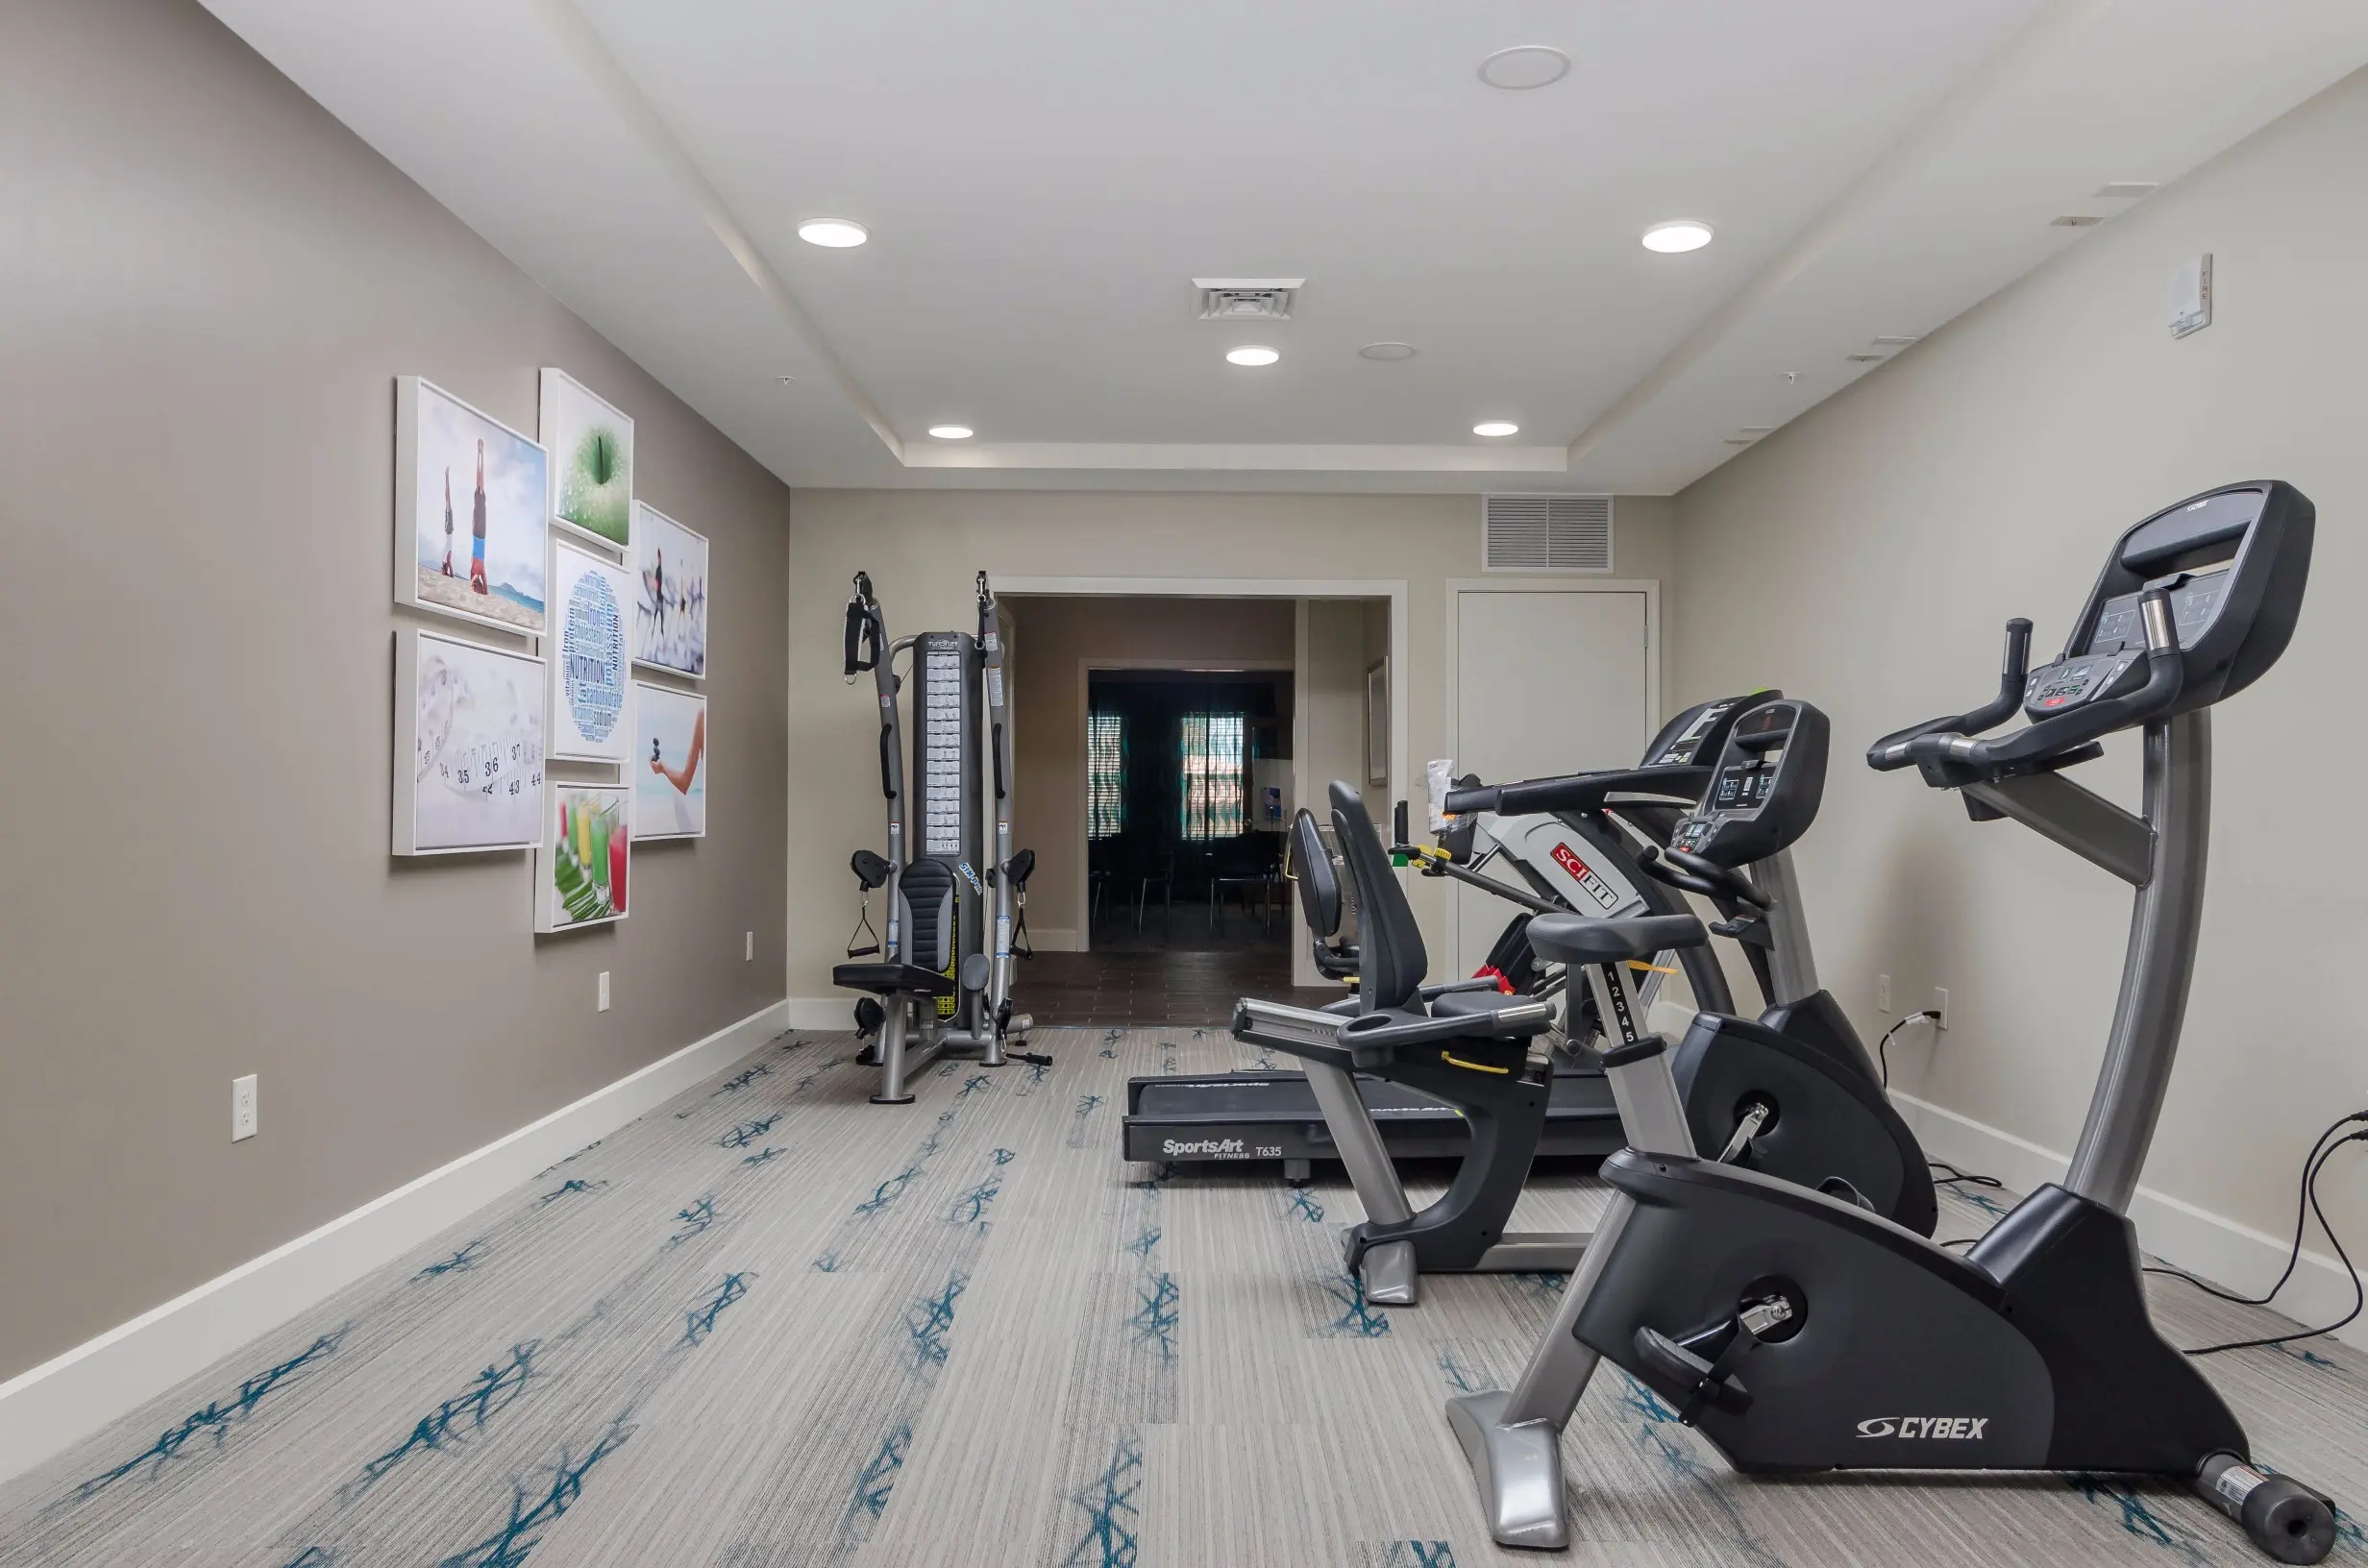 Exercise room at American House Coconut Point, a senior living community in Estero, FL